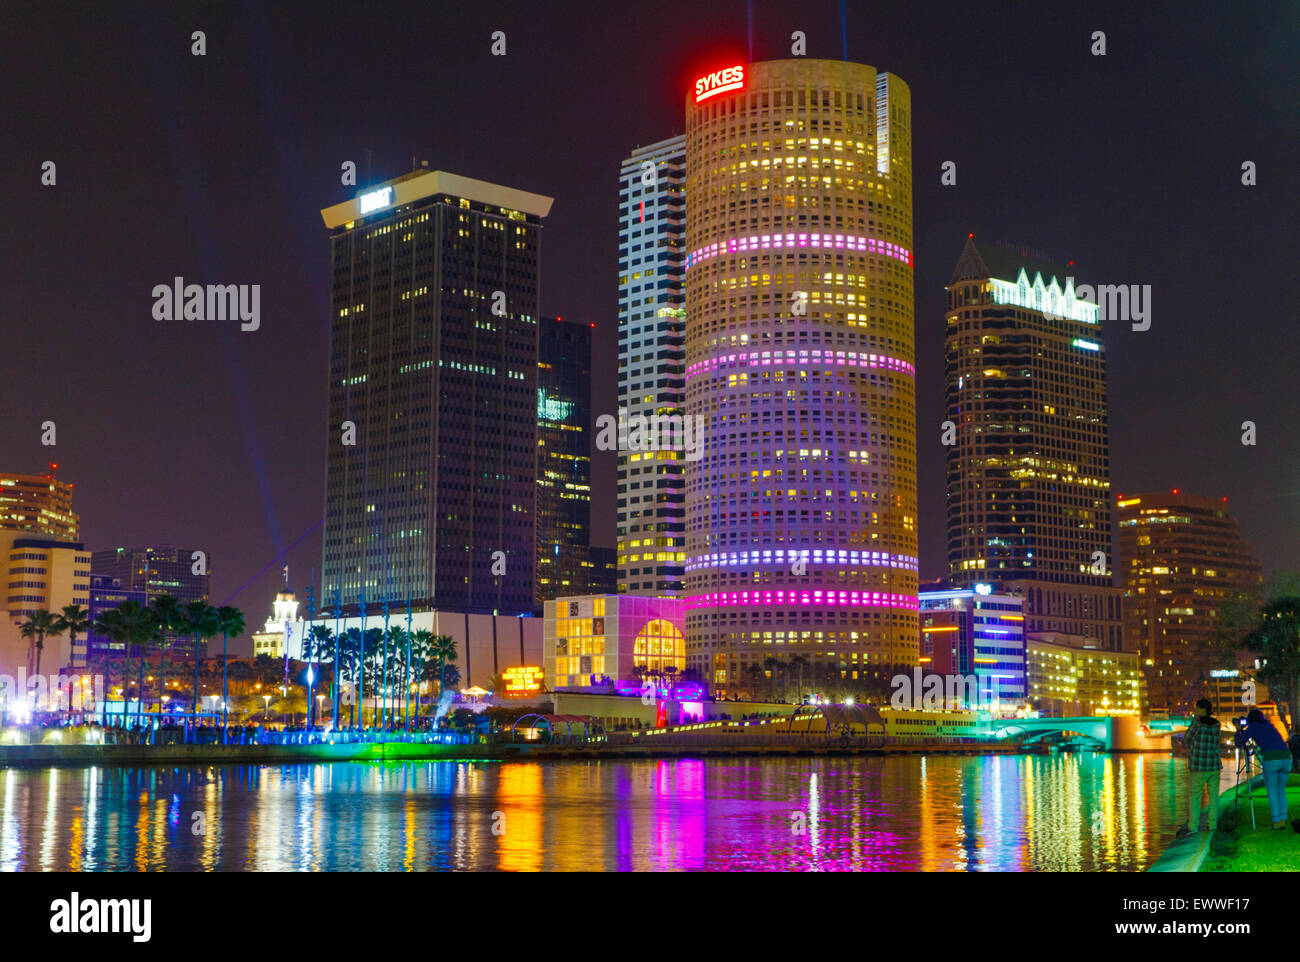 FEBRUARY 22, 2015 - TAMPA, FLORIDA: The City of Tampa is awash in color during the Lights on Tampa 2015 art festival. Stock Photo